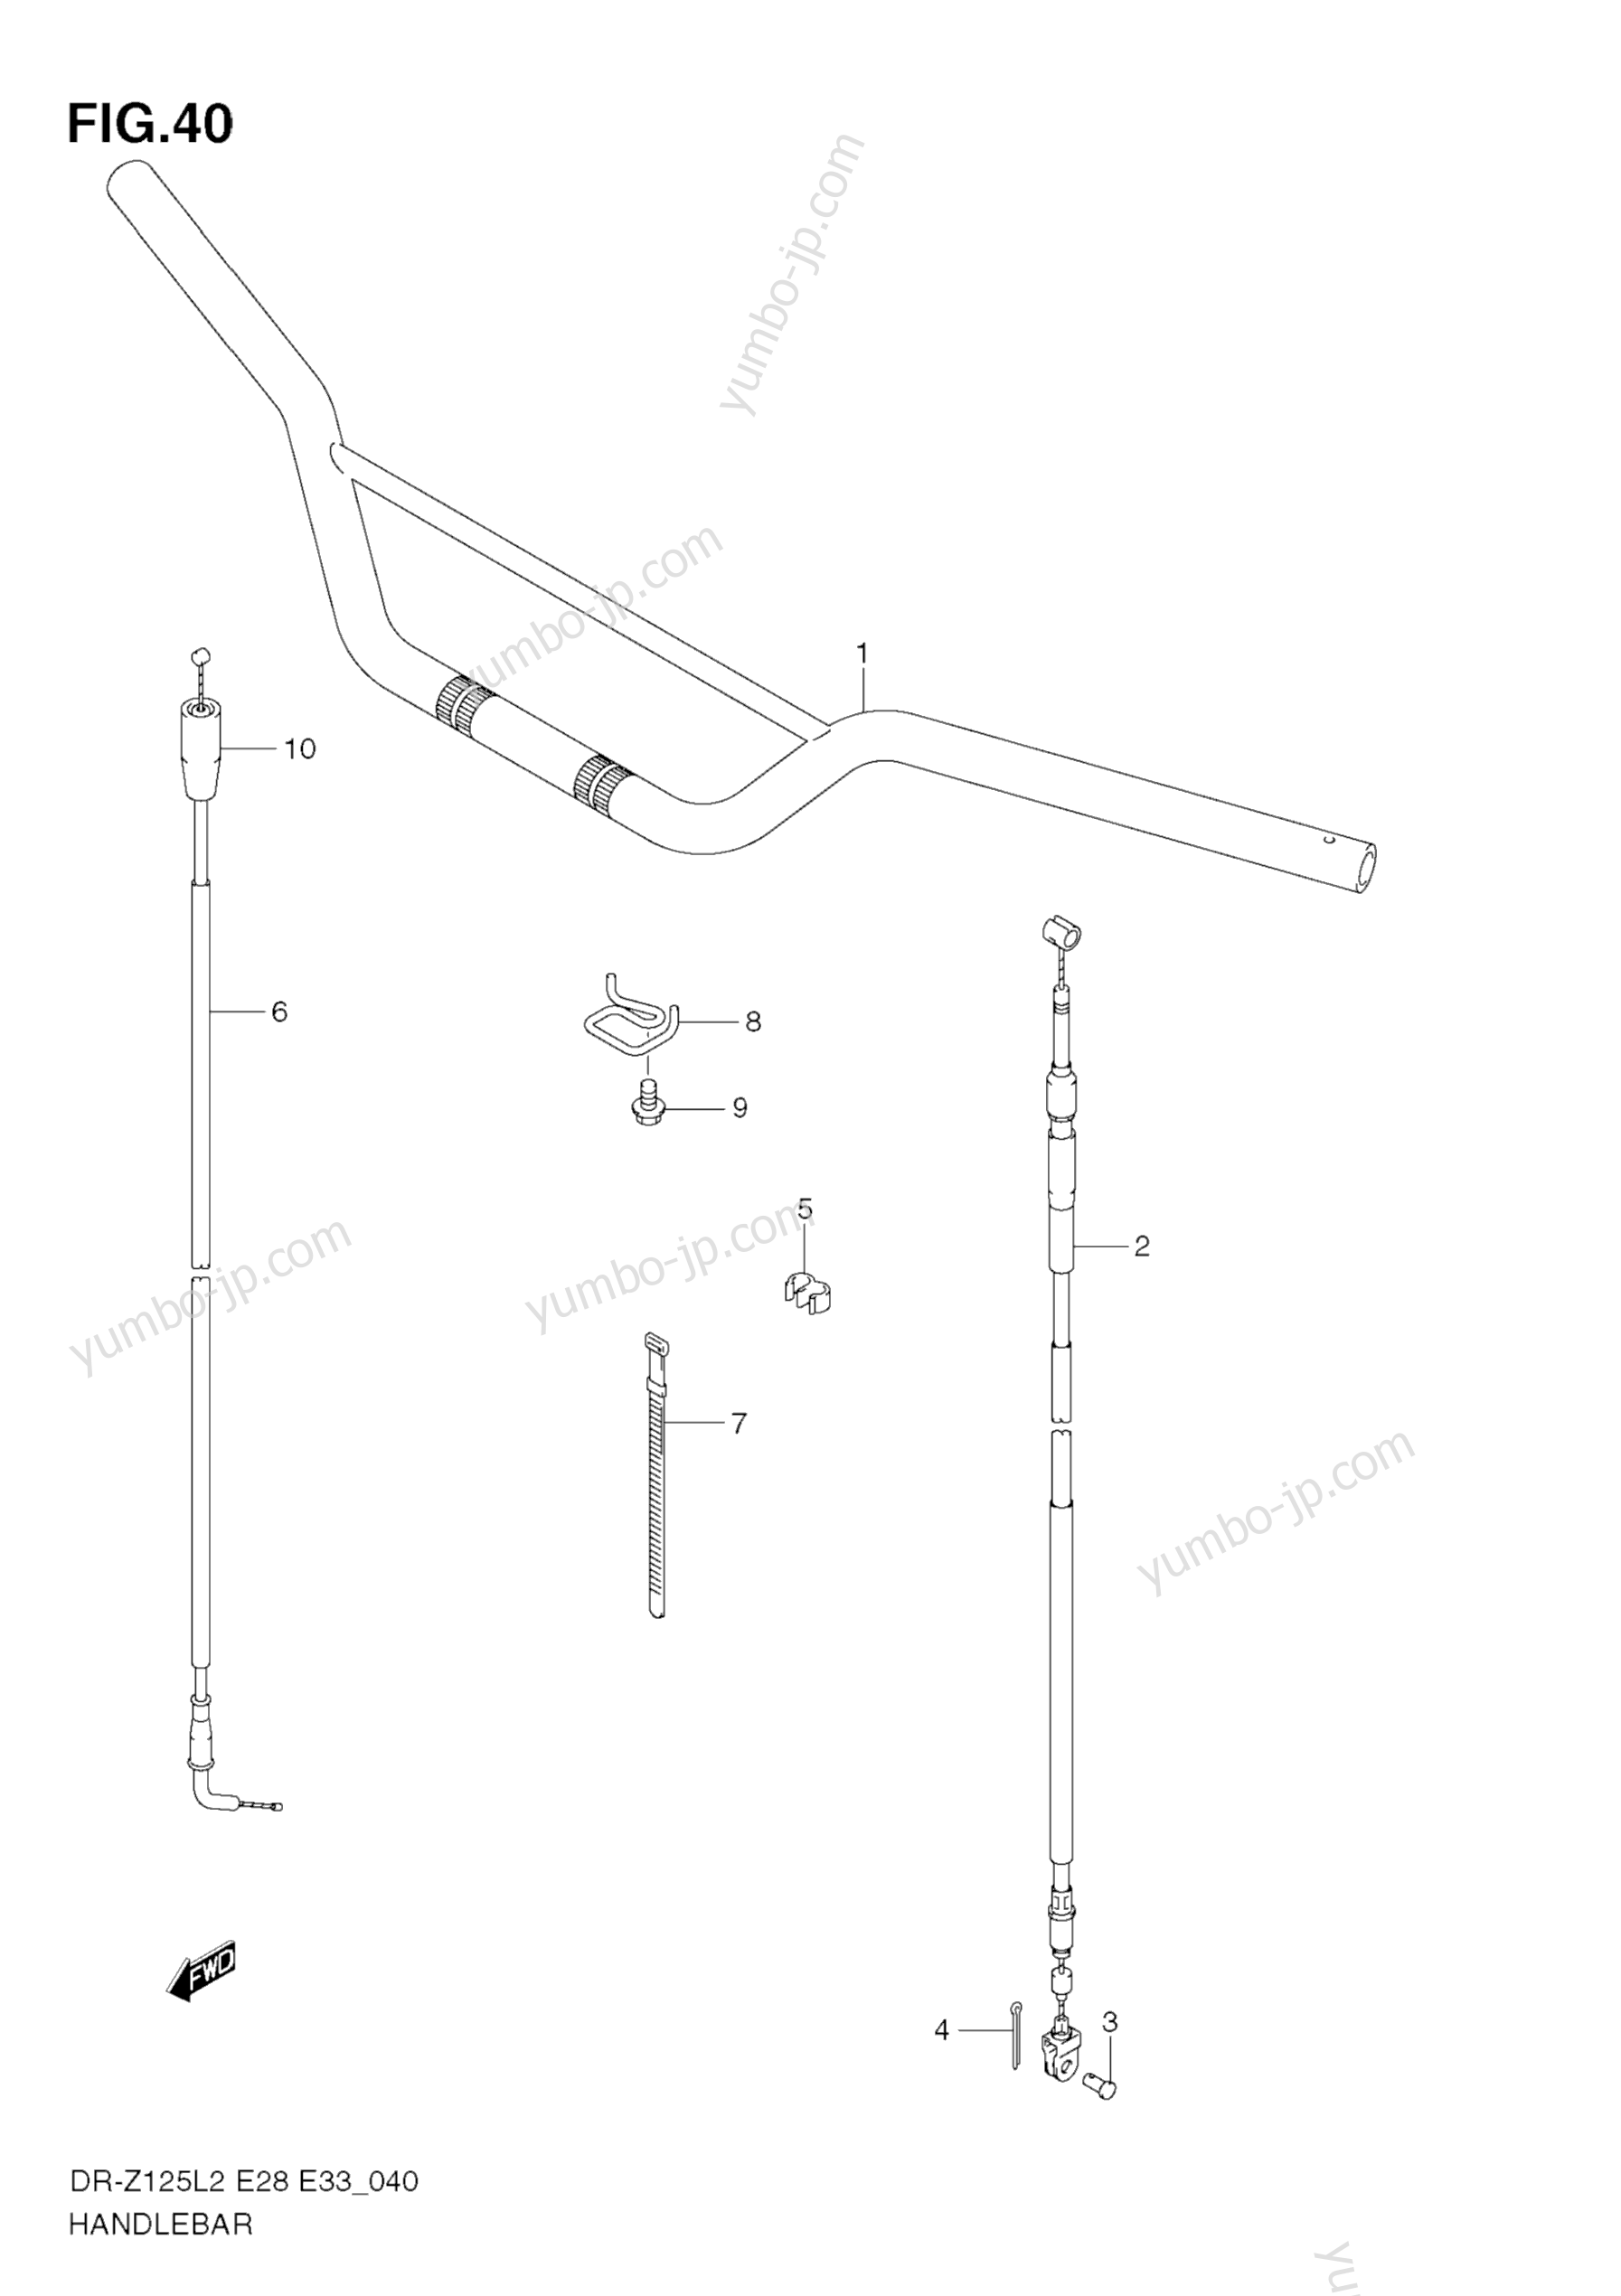 HANDLEBAR (DR-Z125L E33) for motorcycles SUZUKI DR-Z125L 2012 year